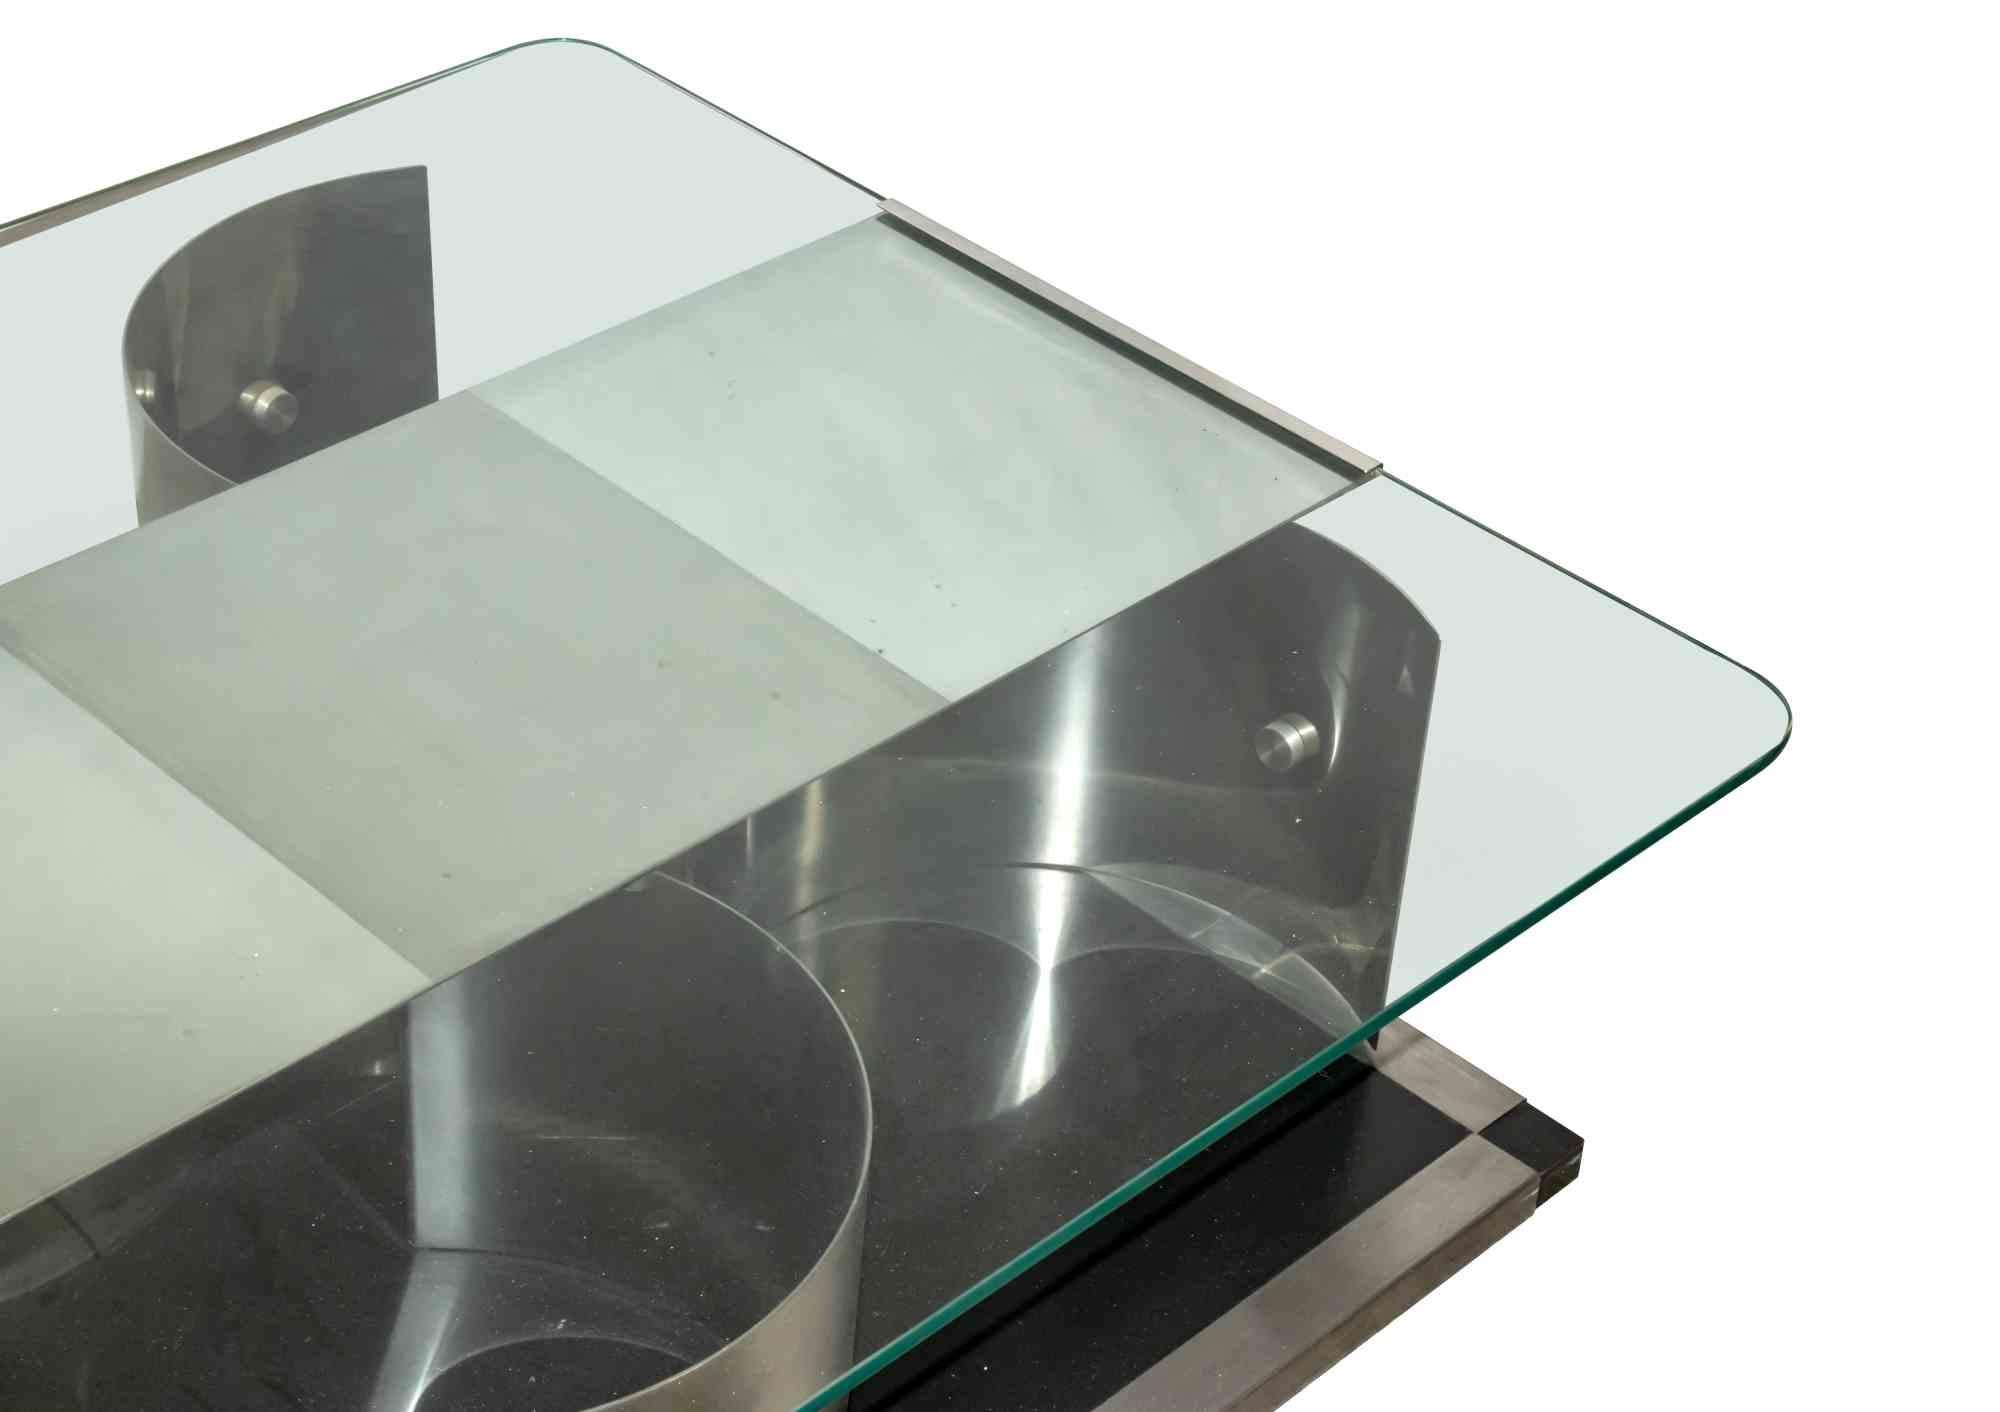 Vintage swivel table is an original design furniture realized by Francois Monnet in the 1970s.

Particular coffee table made of steel with crystal top typically in the French 1970s era.

Designed by Francois Monnet and used typically from French